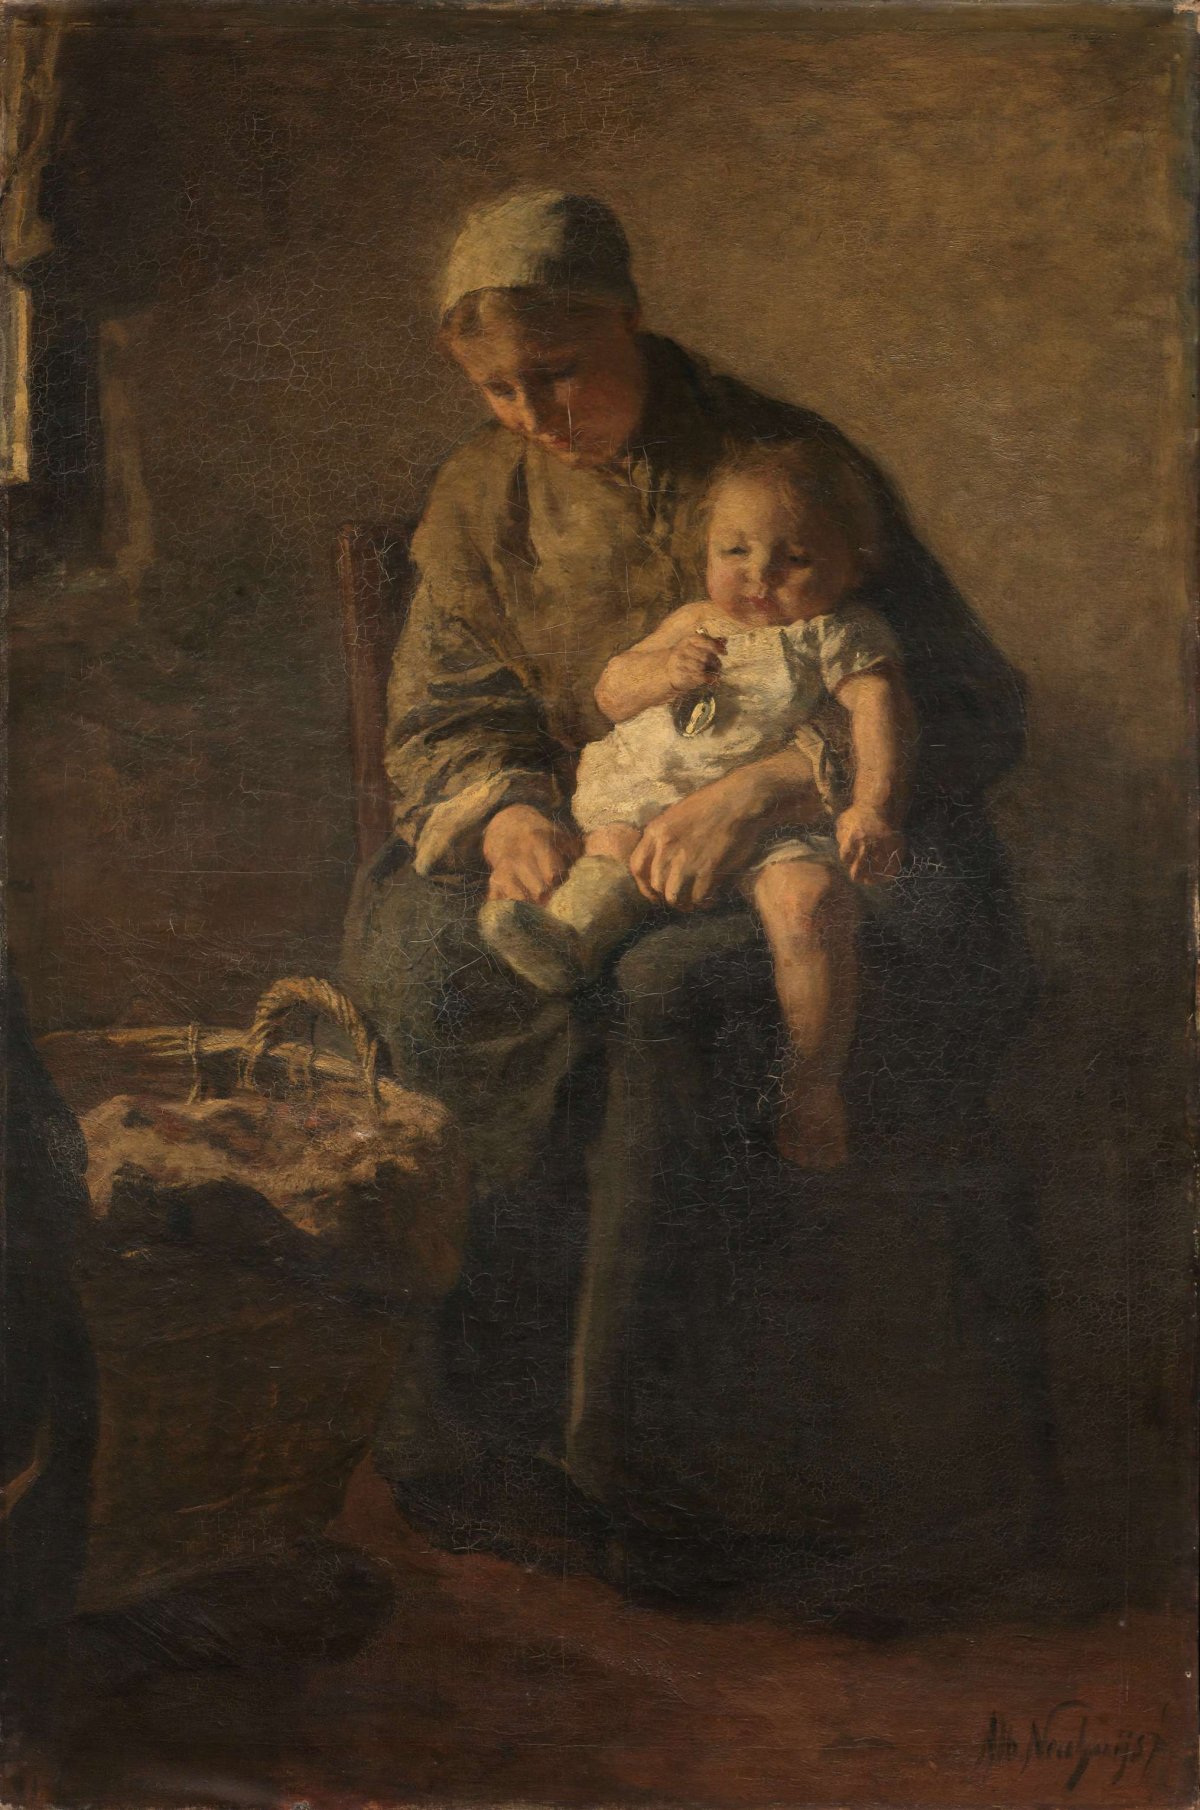 A Mother with her Child, Albert Neuhuys (1844-1914), c. 1880 - c. 1899